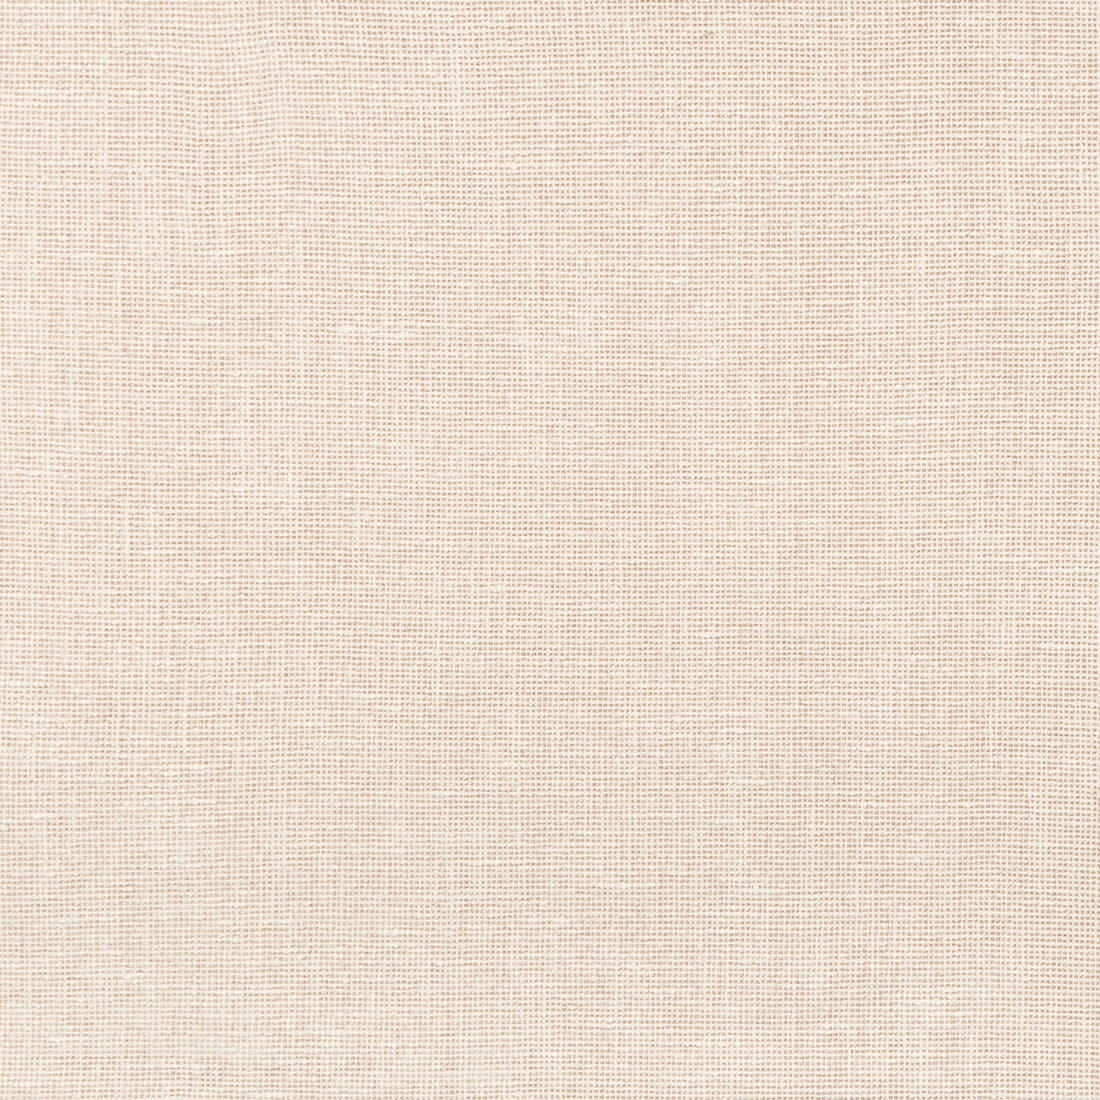 Skiffle fabric in blush color - pattern 34449.17.0 - by Kravet Couture in the Modern Colors-Sojourn Collection collection